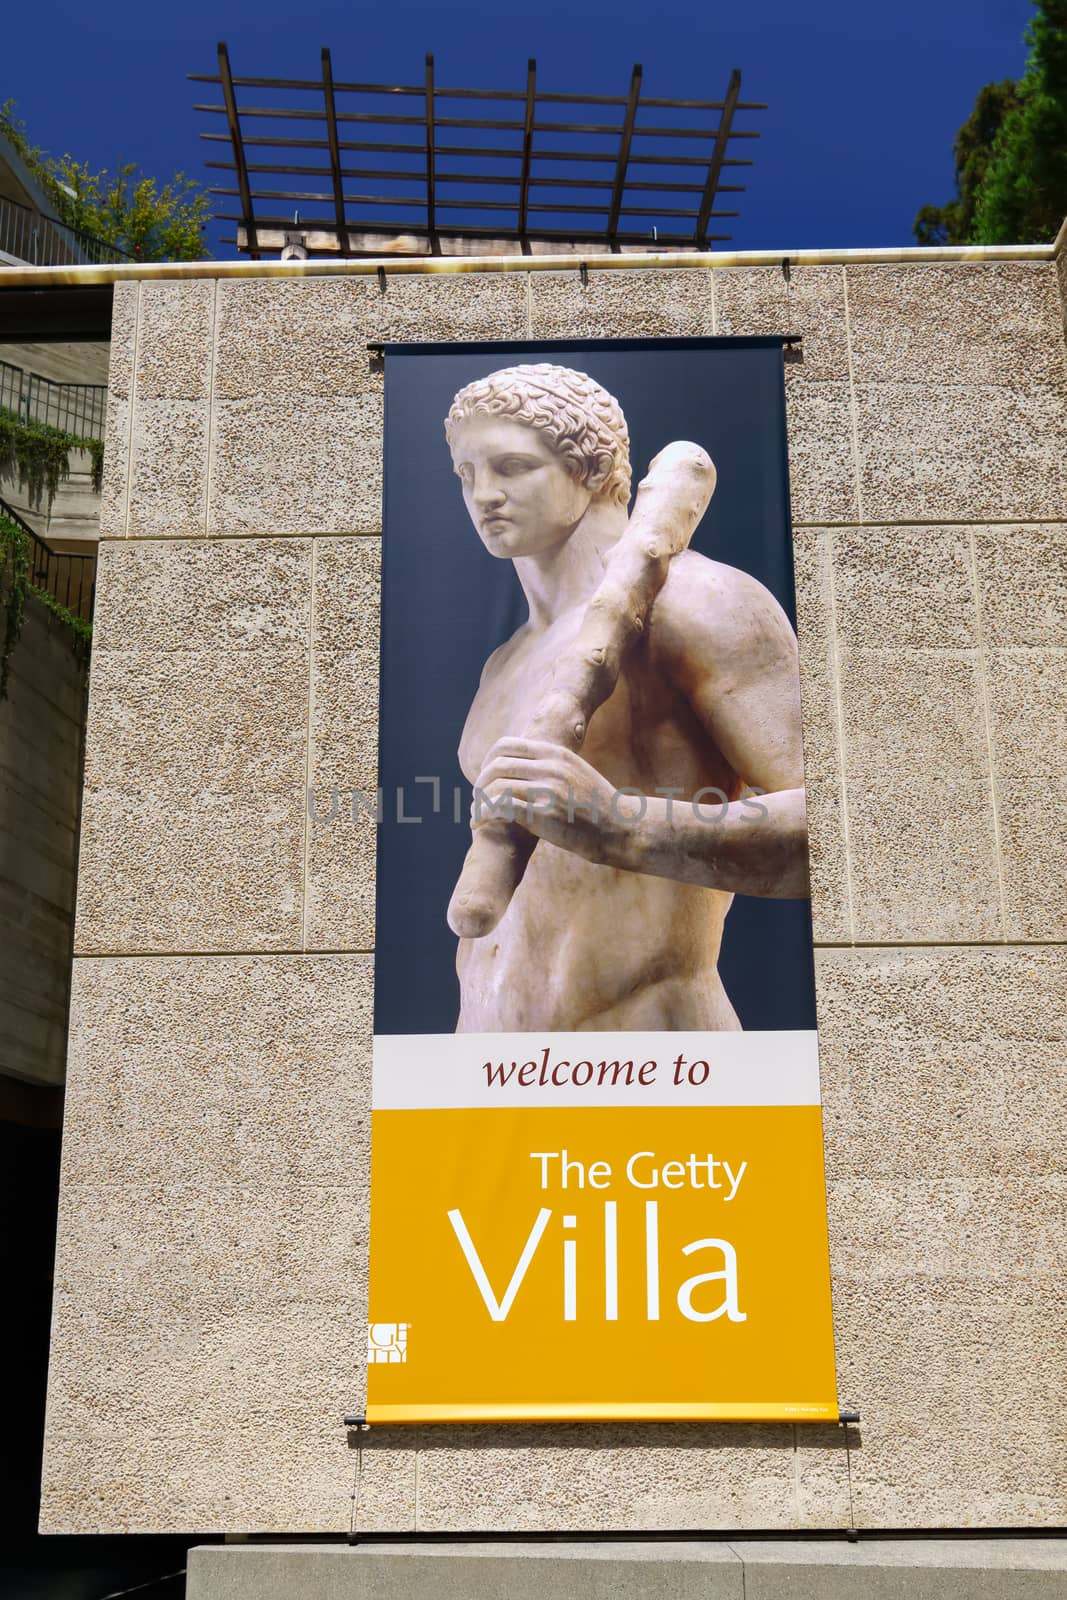 PACIFIC PALISADES, CA/USA - AUGUST 23, 2015: The Getty Villa entrance. The Getty Villa is one of two locations of the J. Paul Getty Museum.